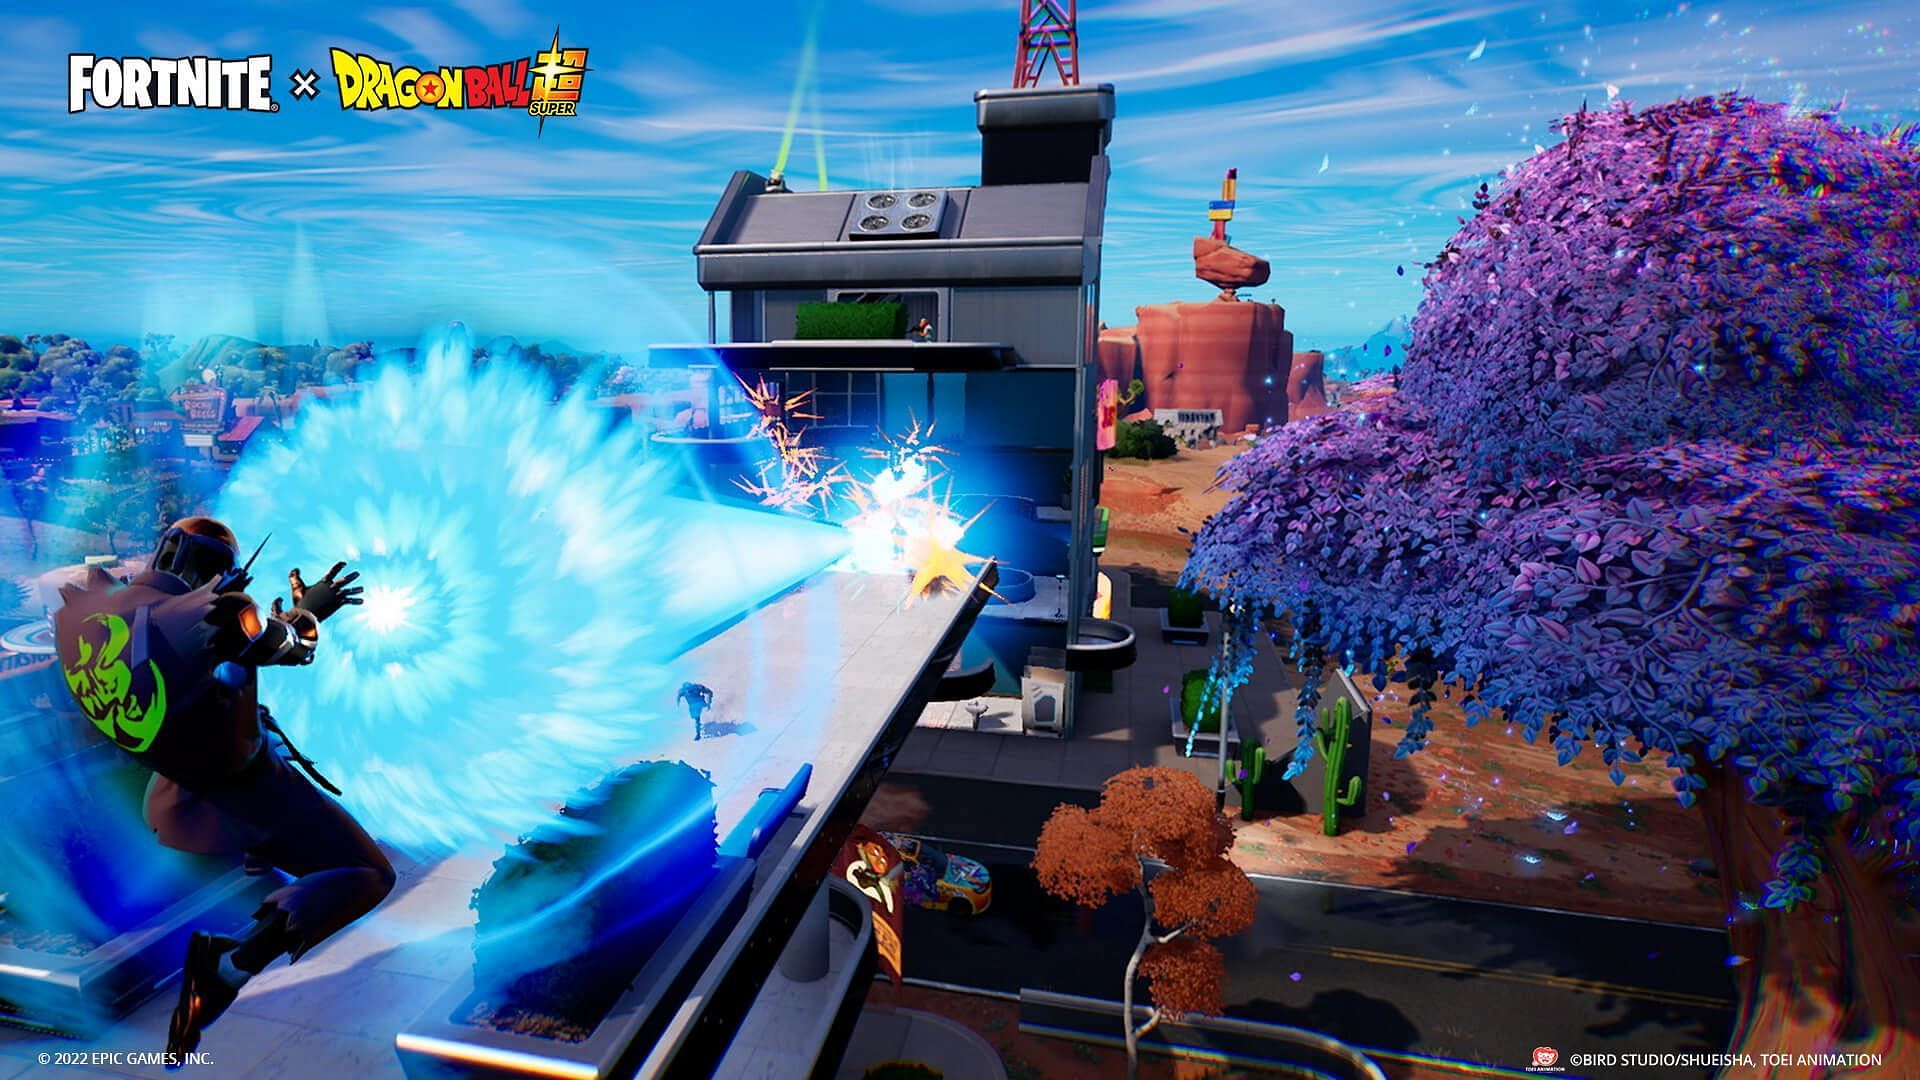 Players can now use Kamehameha in Fortnite to eliminate players (Image via Epic Games)